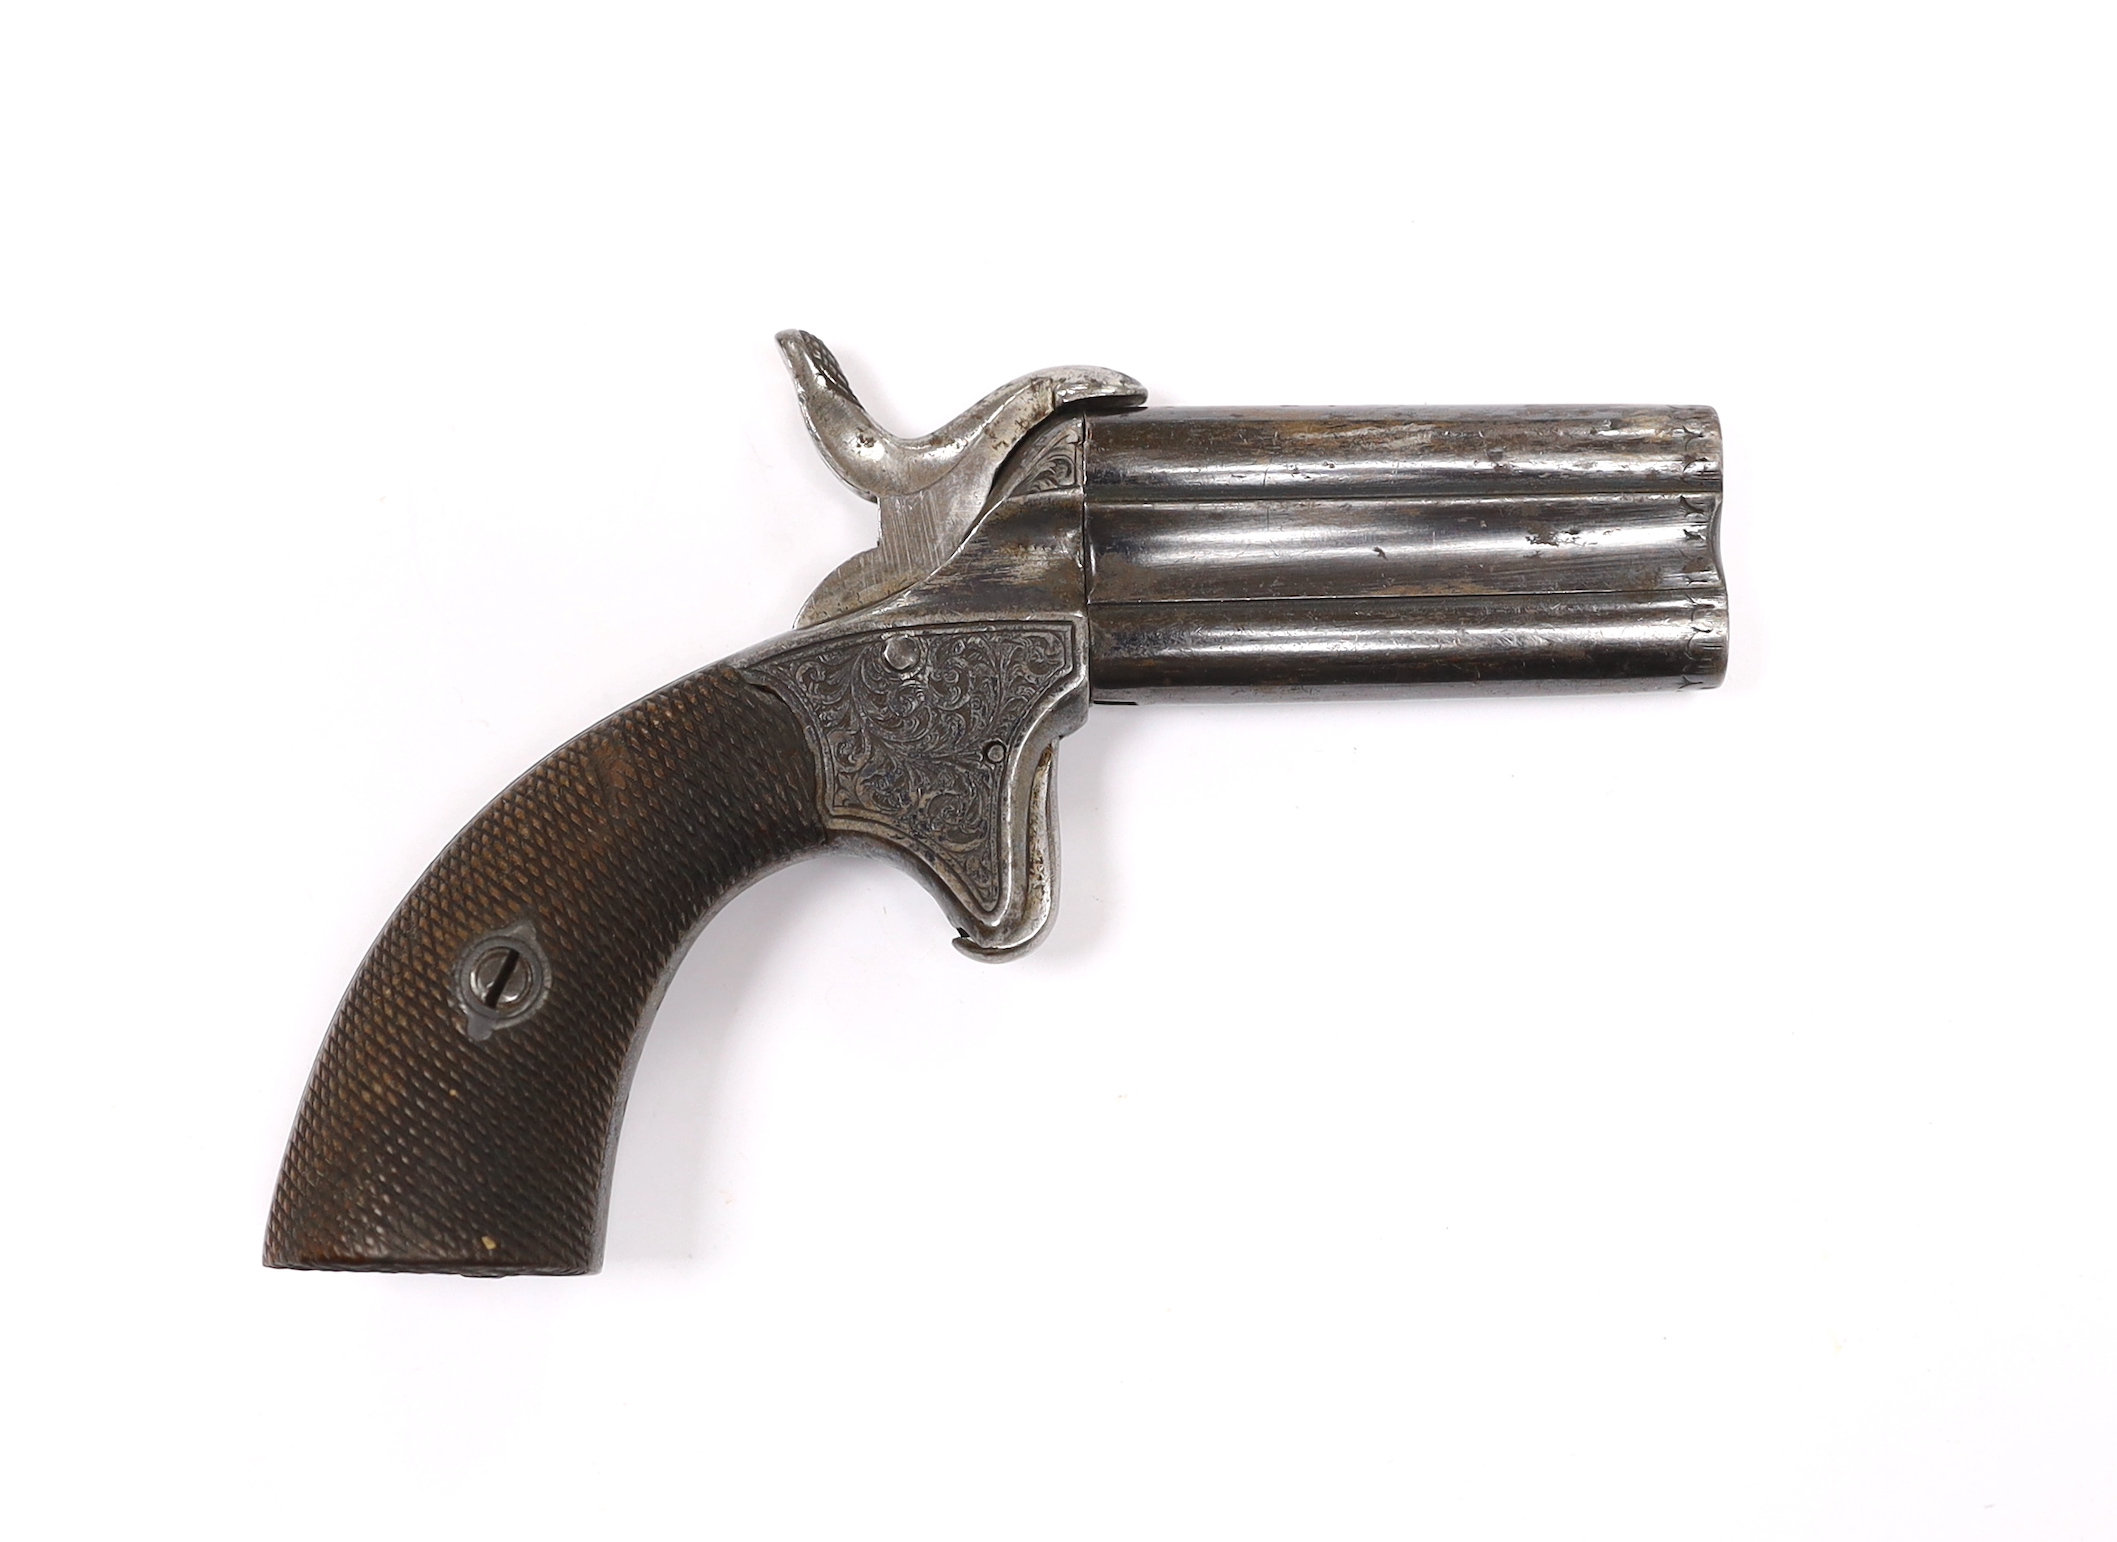 A Belgium mid 19th century double barrelled over-under pinfire muff pistol, stamped with Liege ELG proof mark, barrels 5.5cm